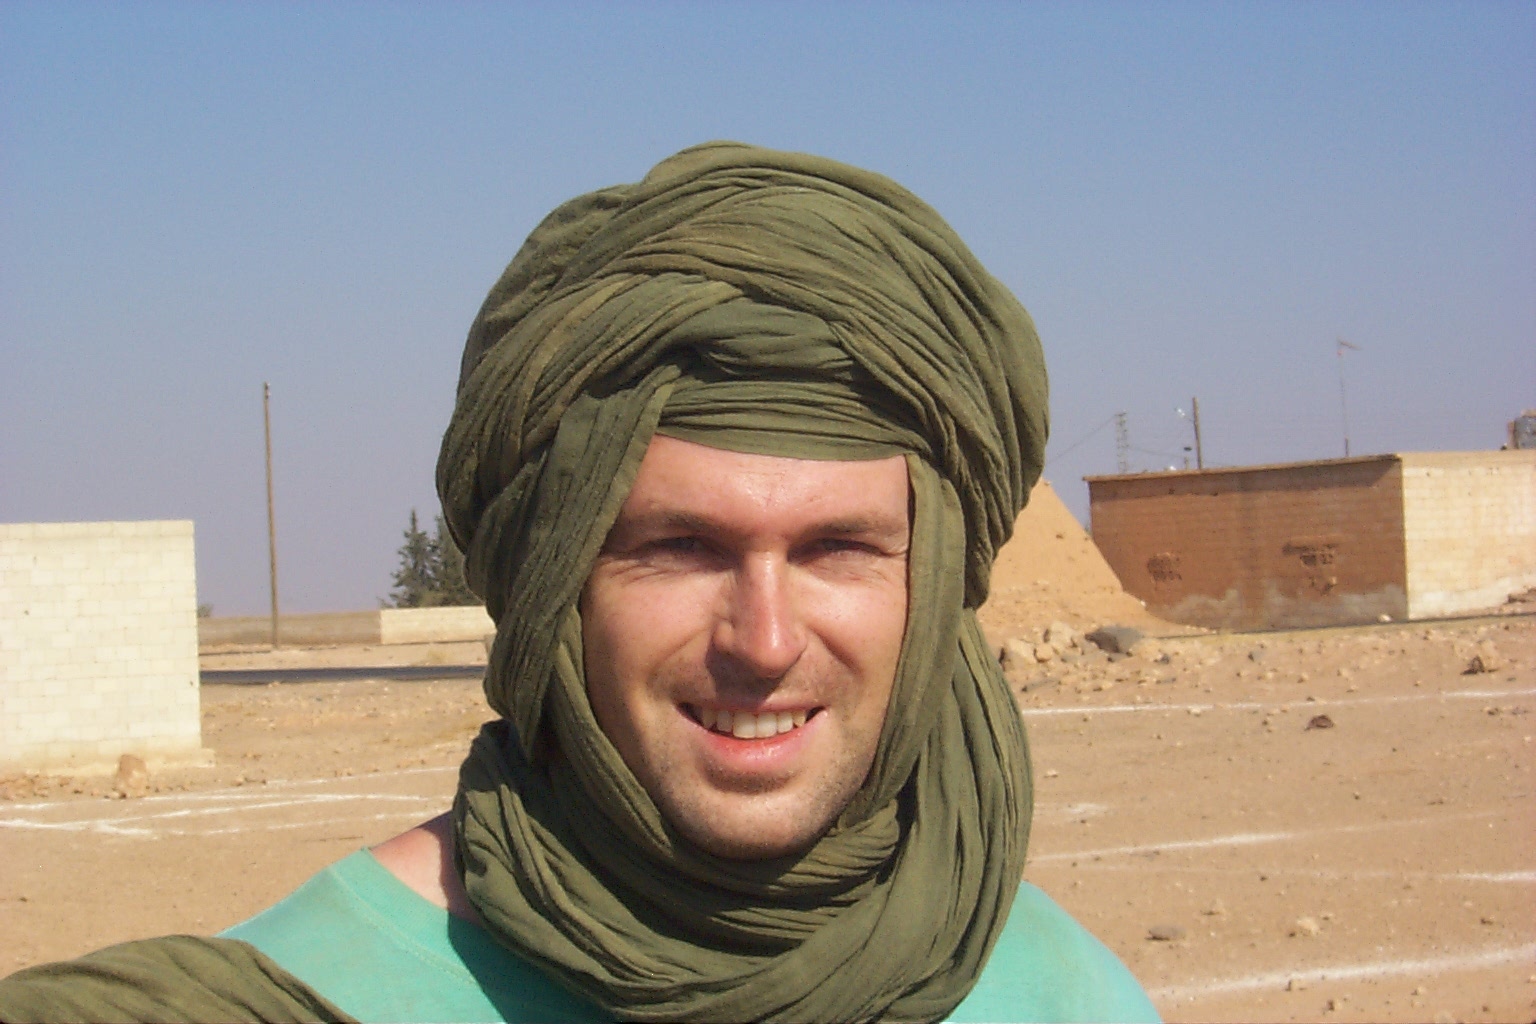 the man is dressed in green shawl with a smile